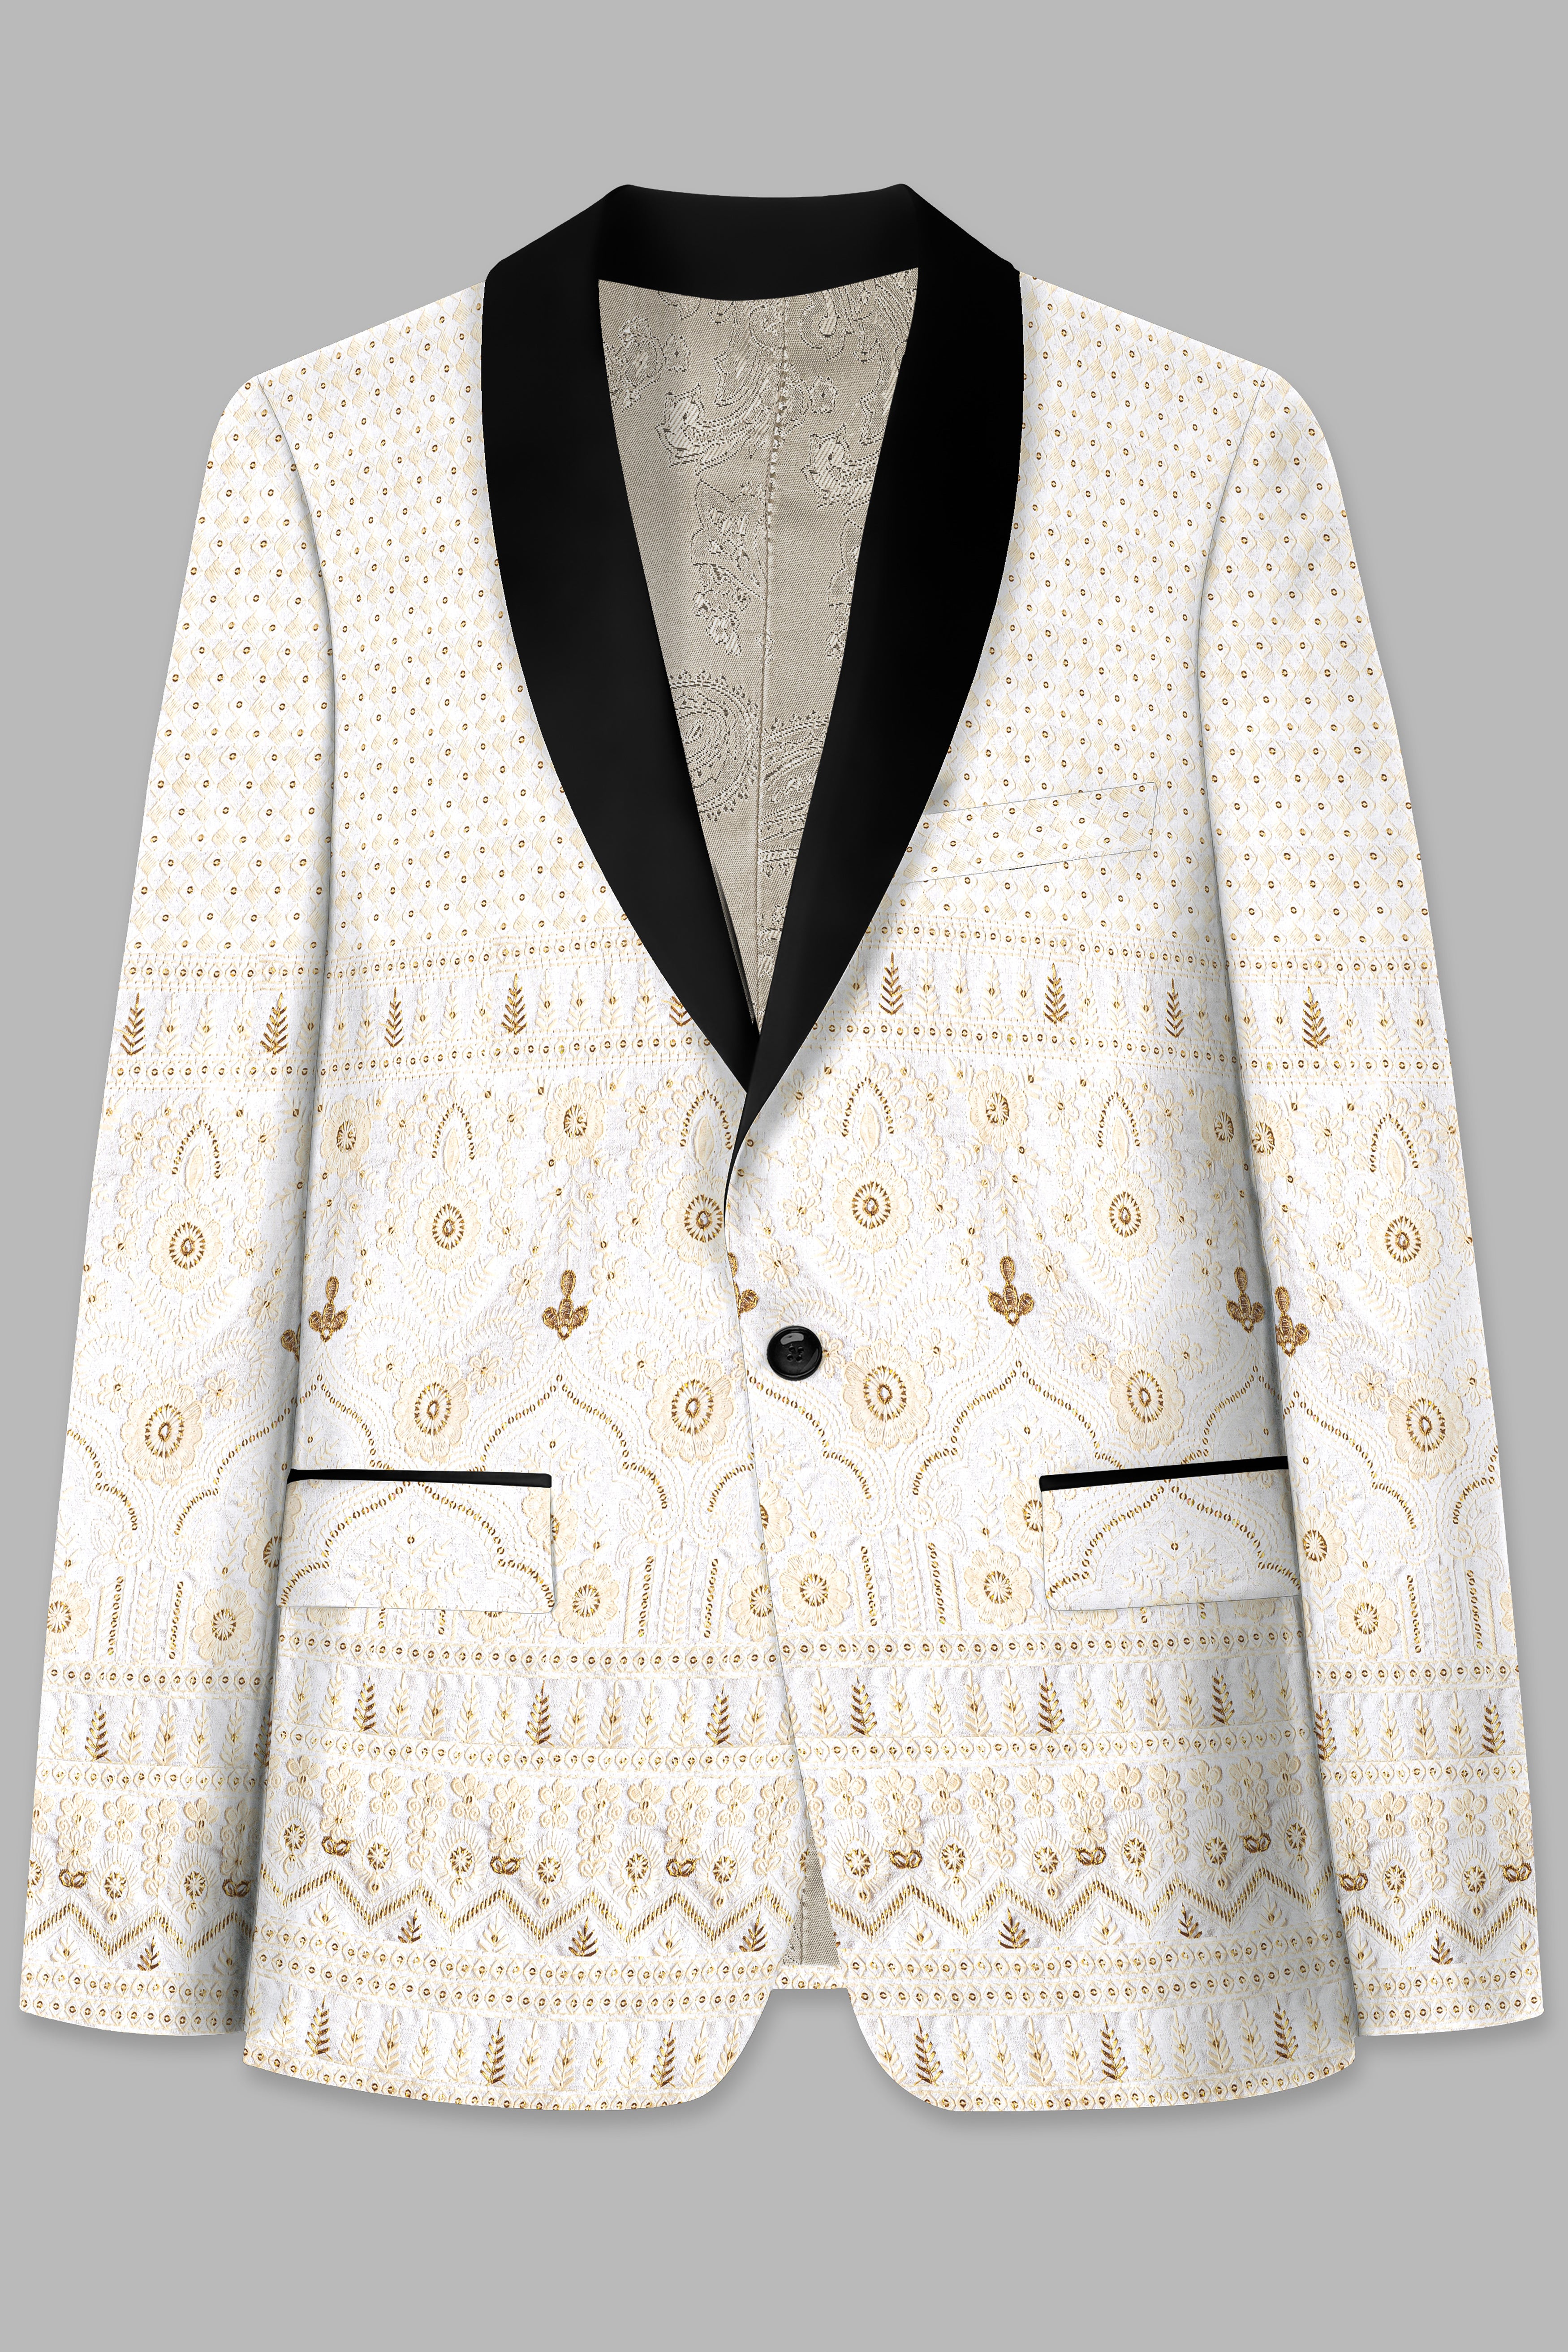 Sand Cream Thread and Sequin Embroidered Tuxedo Blazer BL3740-BKL-36, BL3740-BKL-38, BL3740-BKL-40, BL3740-BKL-42, BL3740-BKL-44, BL3740-BKL-46, BL3740-BKL-48, BL3740-BKL-50, BL3740-BKL-52, BL3740-BKL-54, BL3740-BKL-56, BL3740-BKL-58, BL3740-BKL-60